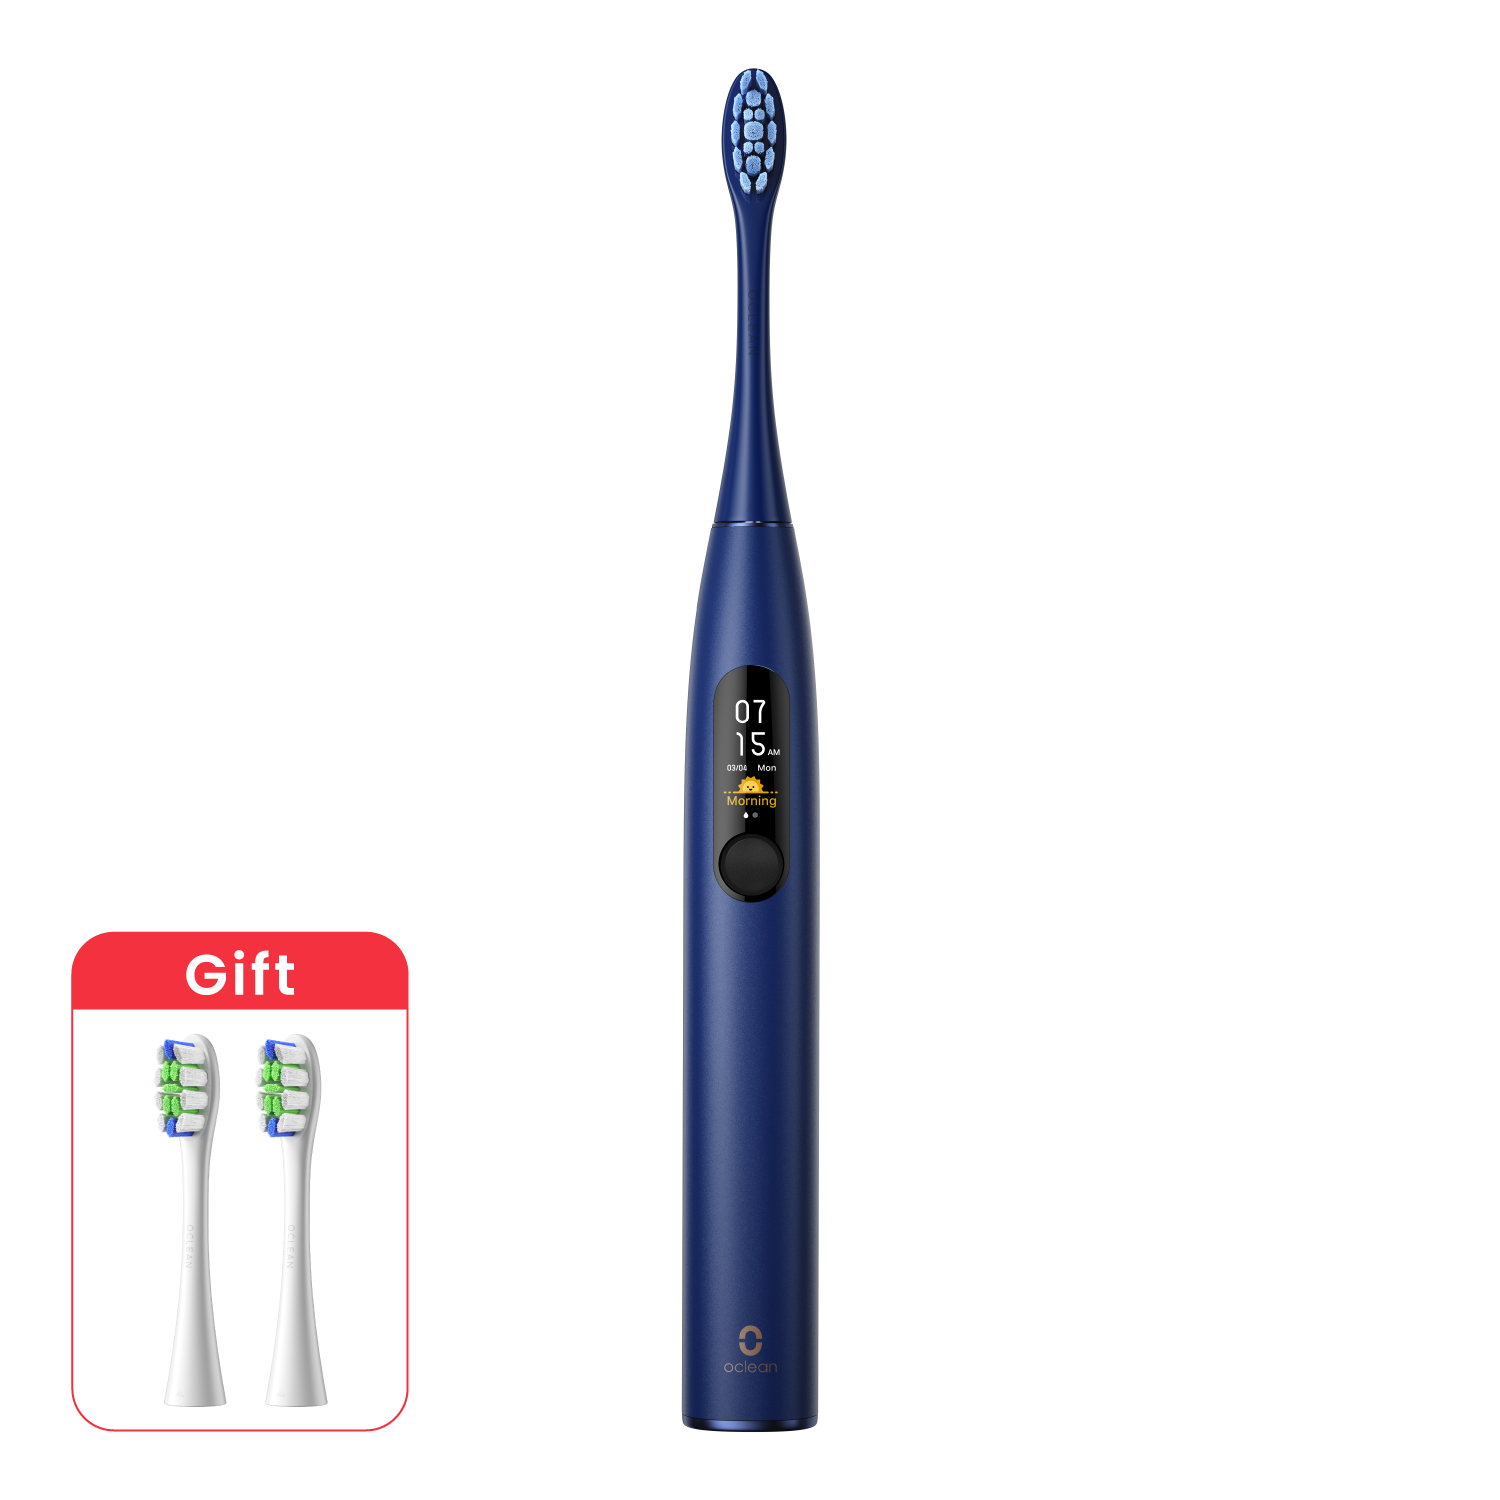 Oclean X Pro Smart Sonic Electric Toothbrush-Toothbrushes-Oclean US Store